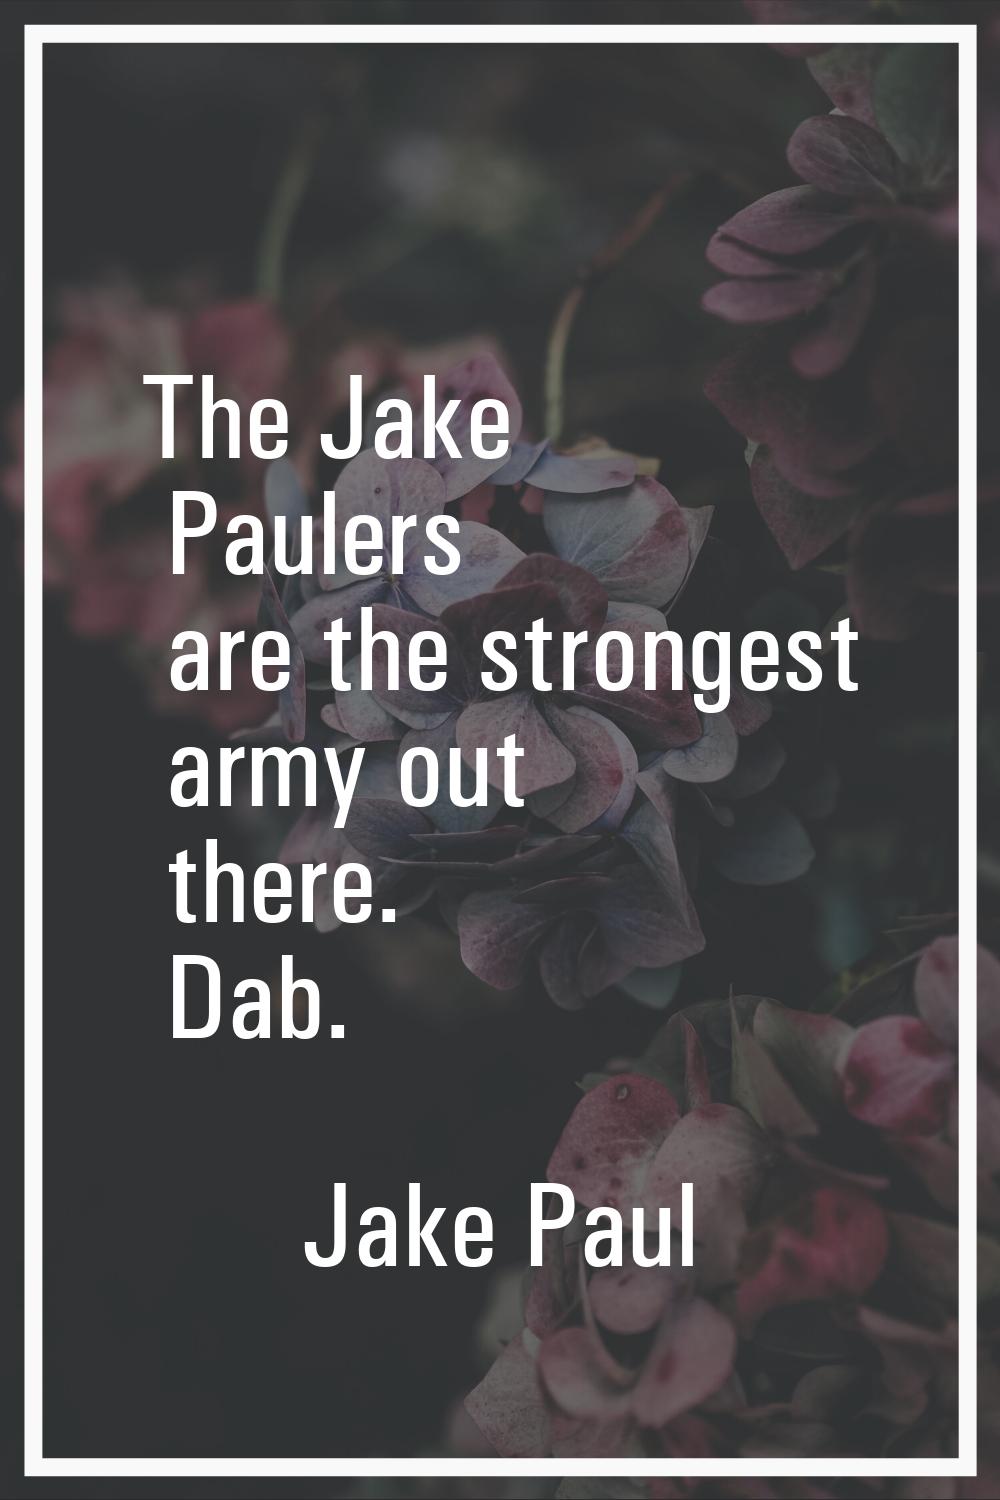 The Jake Paulers are the strongest army out there. Dab.